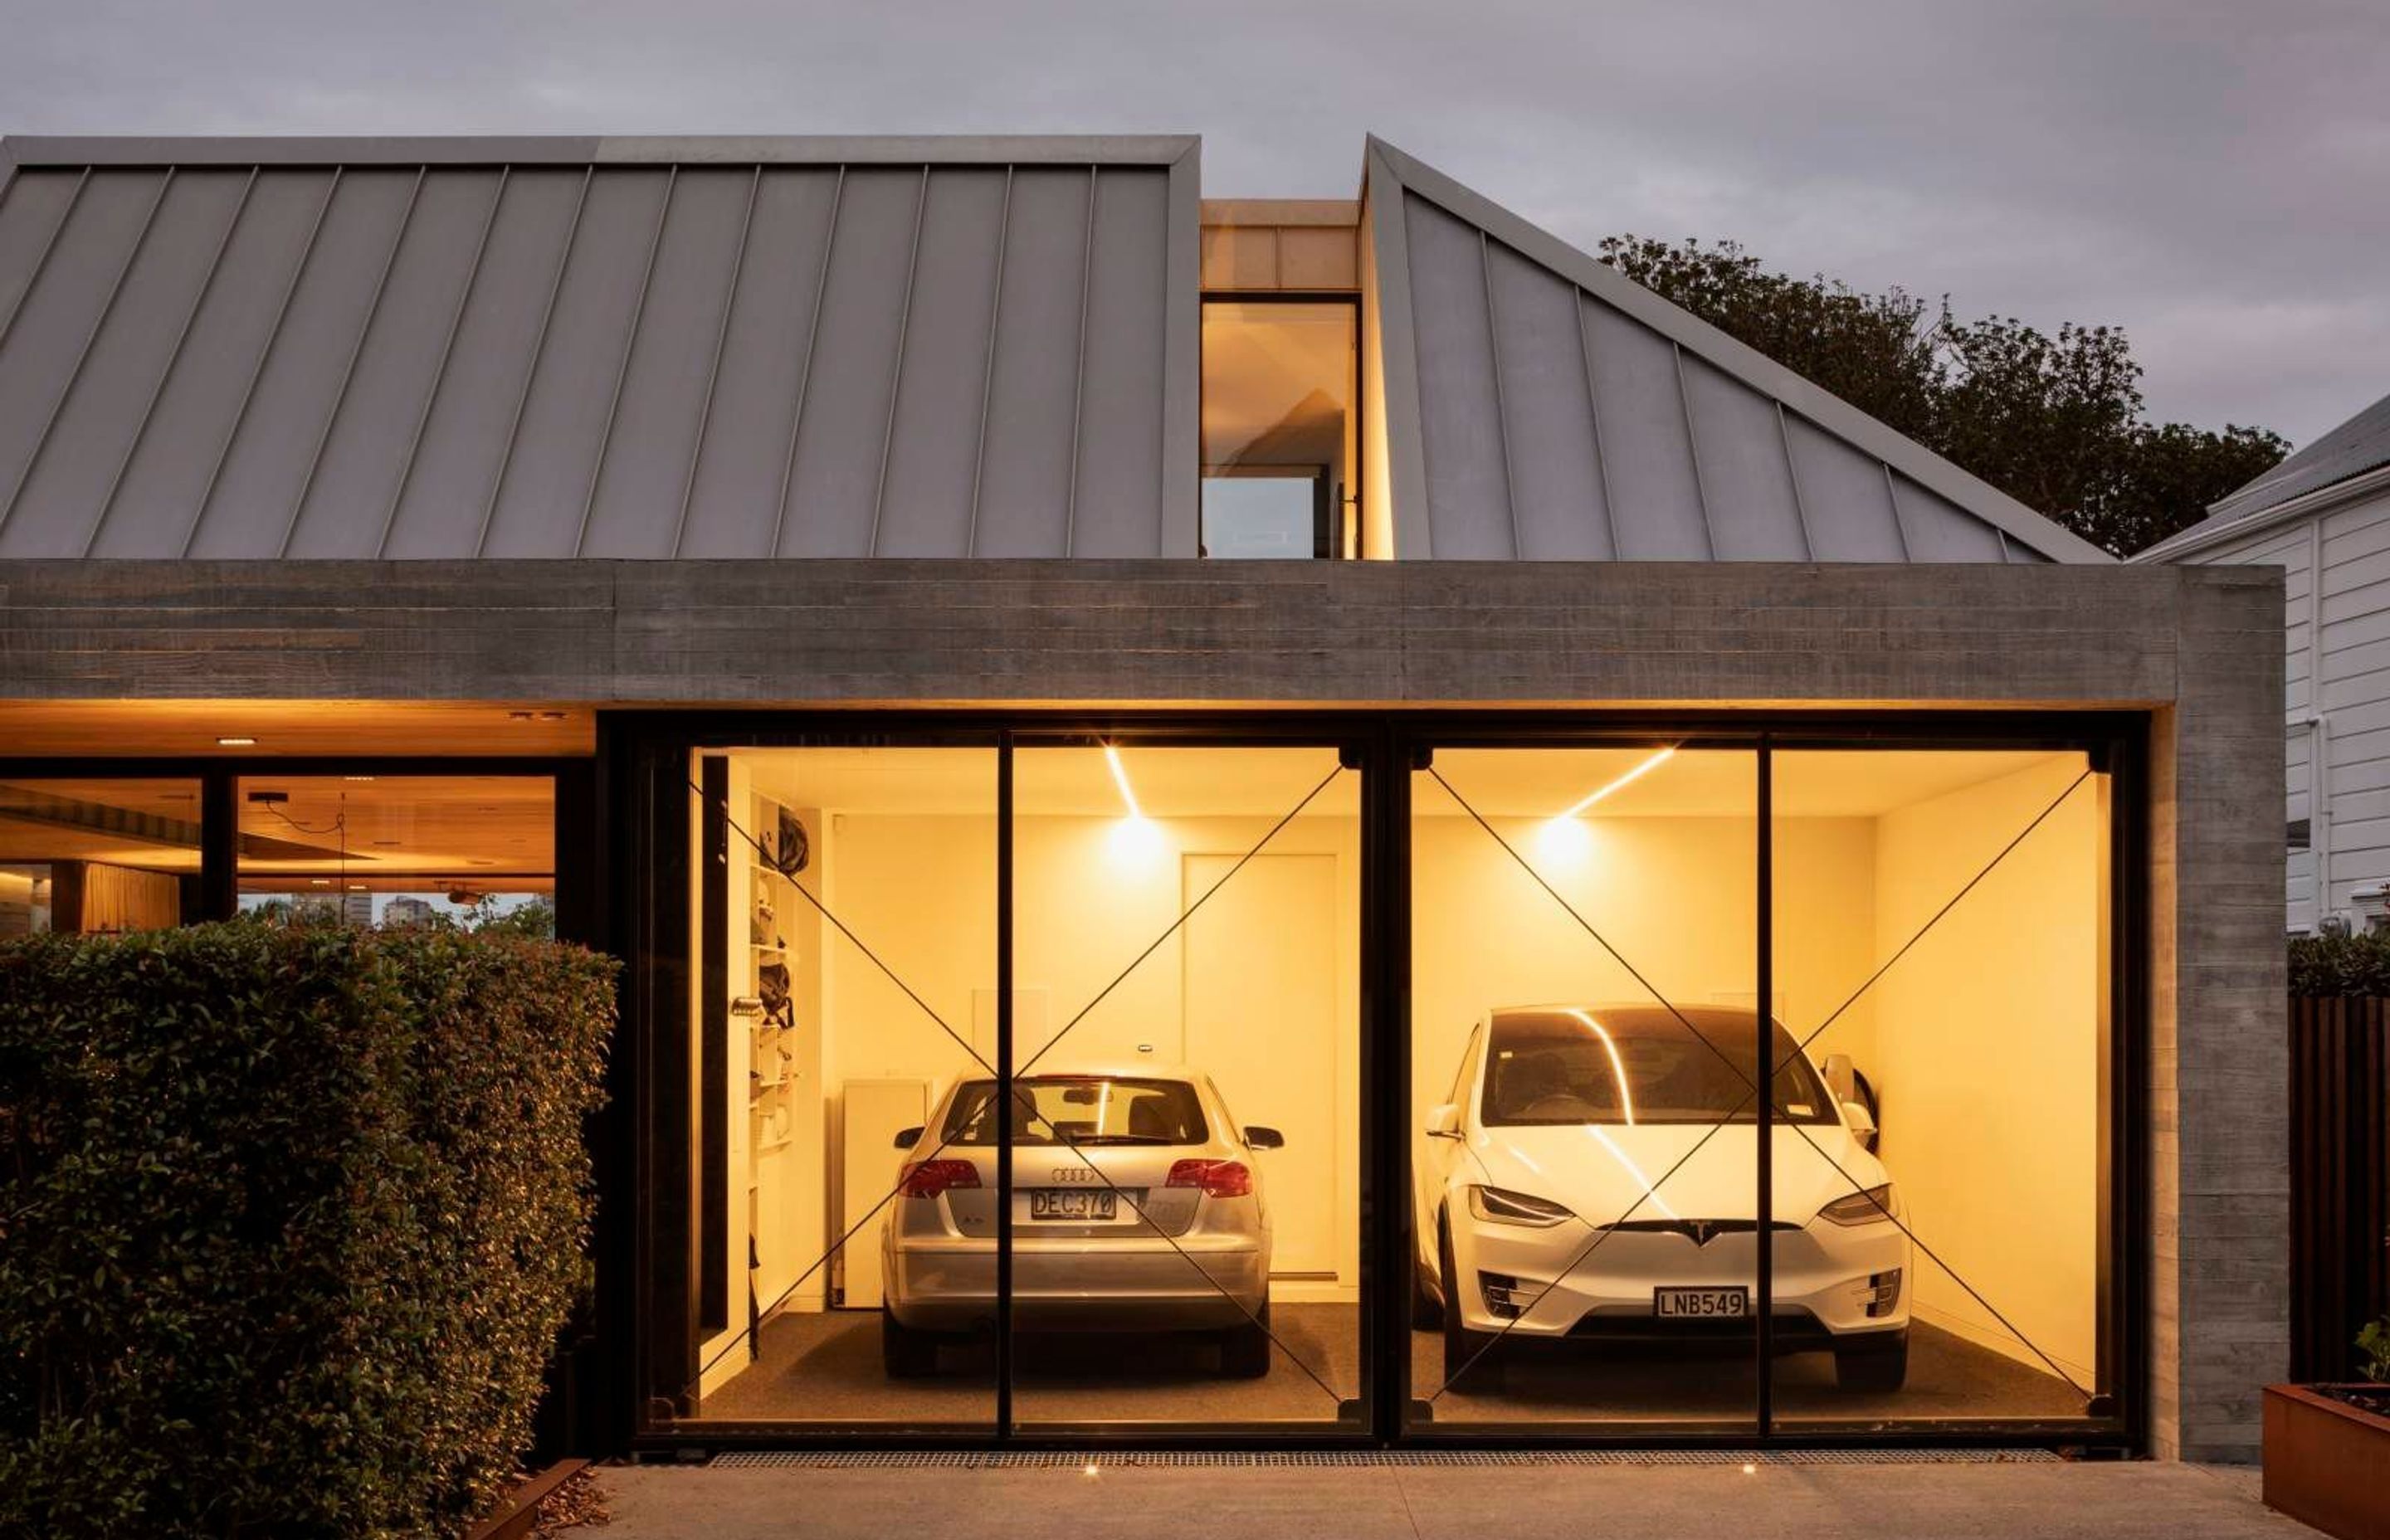 Situated in a heritage zone, council stipulated that the garage doors should contain windows. Architect Jack McKinney took that stipulation to the extreme, setting up a dialogue between the house and the streetscape.